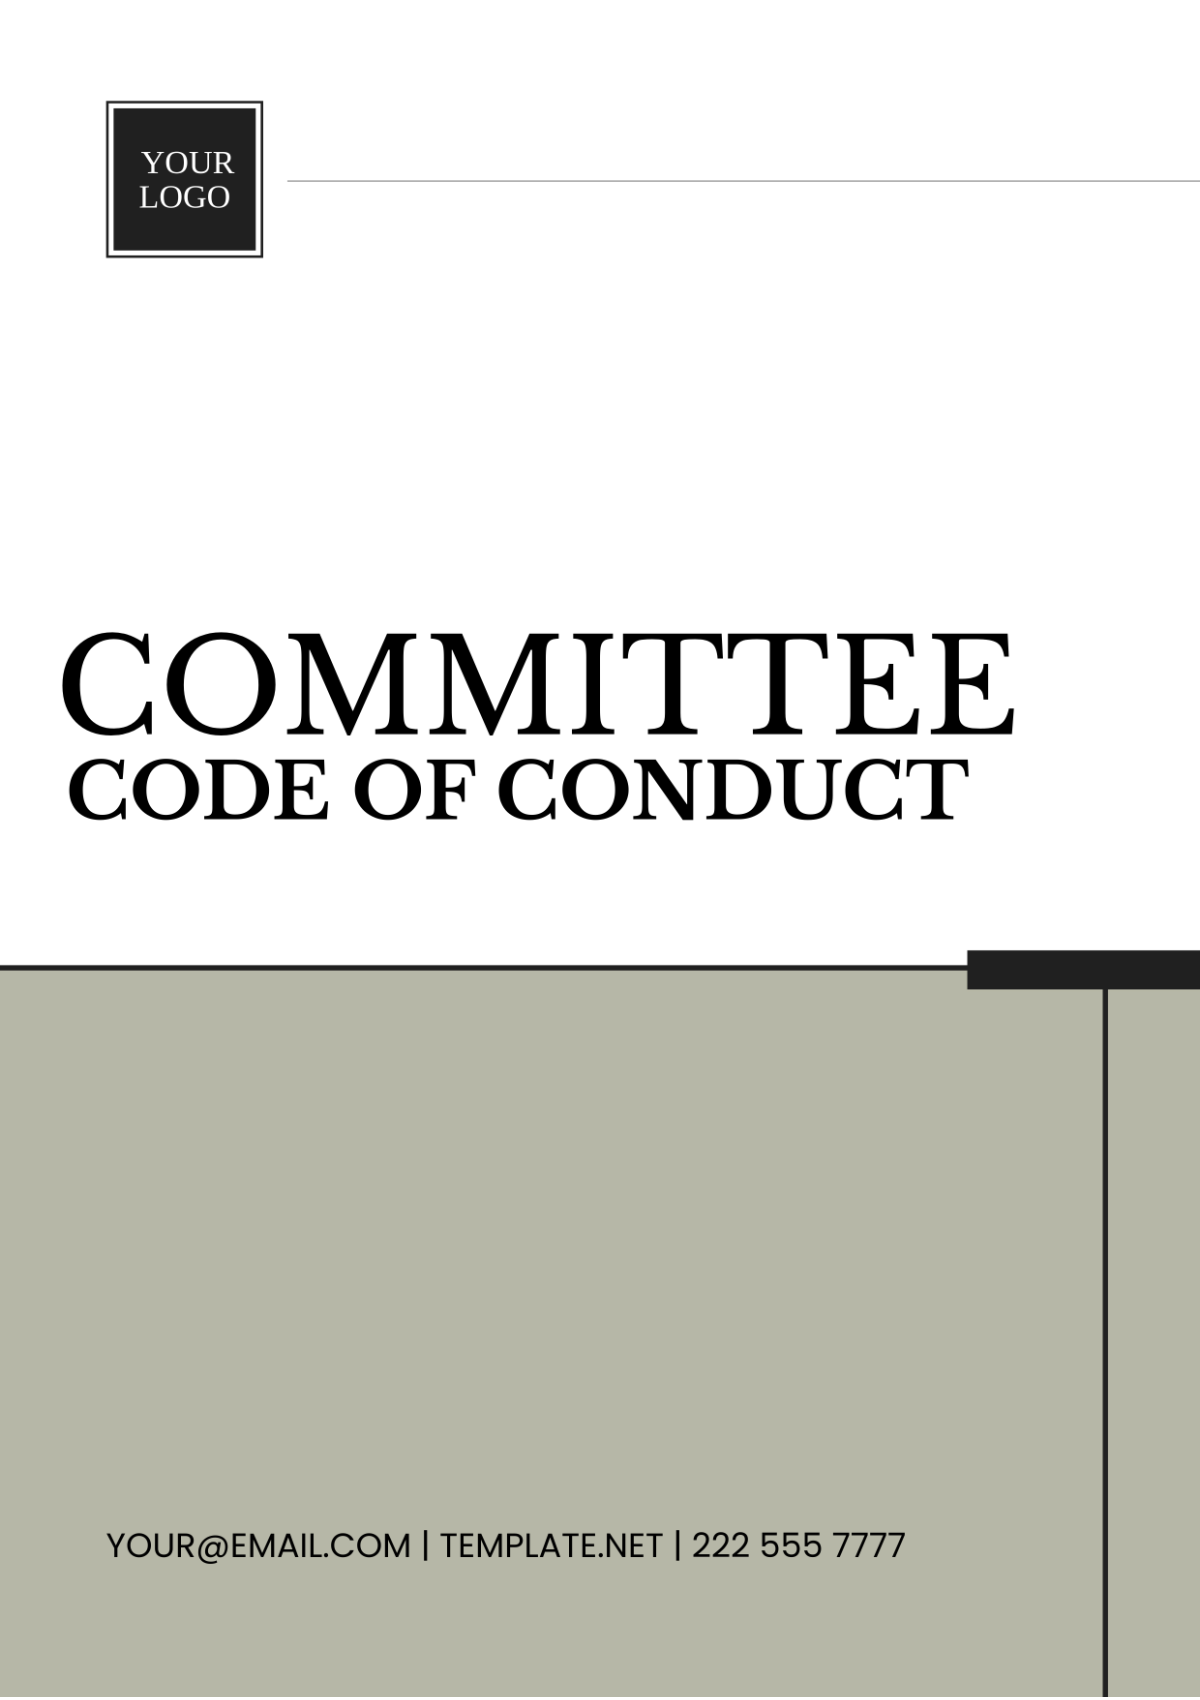 Committee Code of Conduct Template